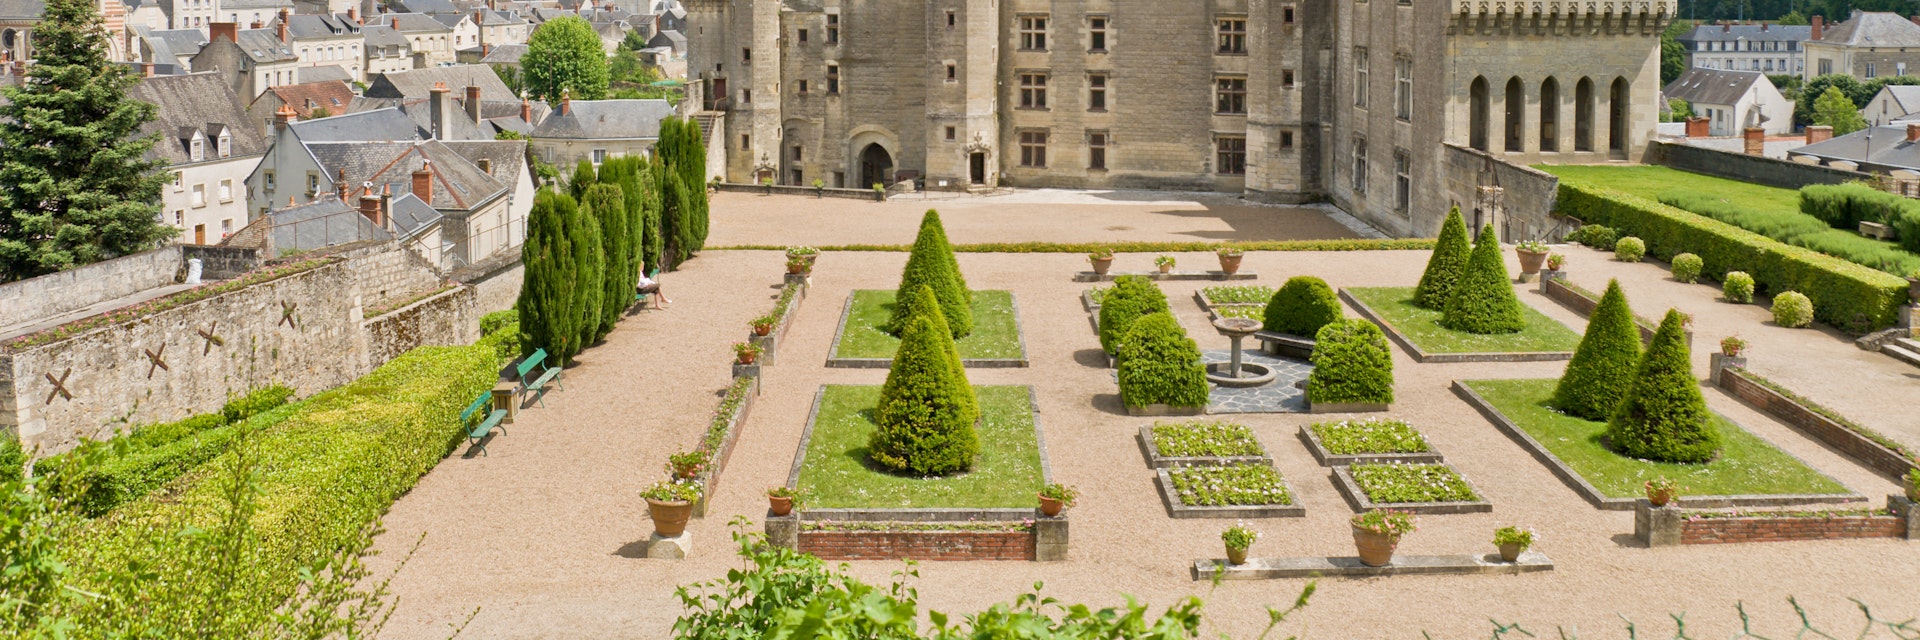 Panoramic view of the castle, garden and town Langeais, Loire Valley, France.